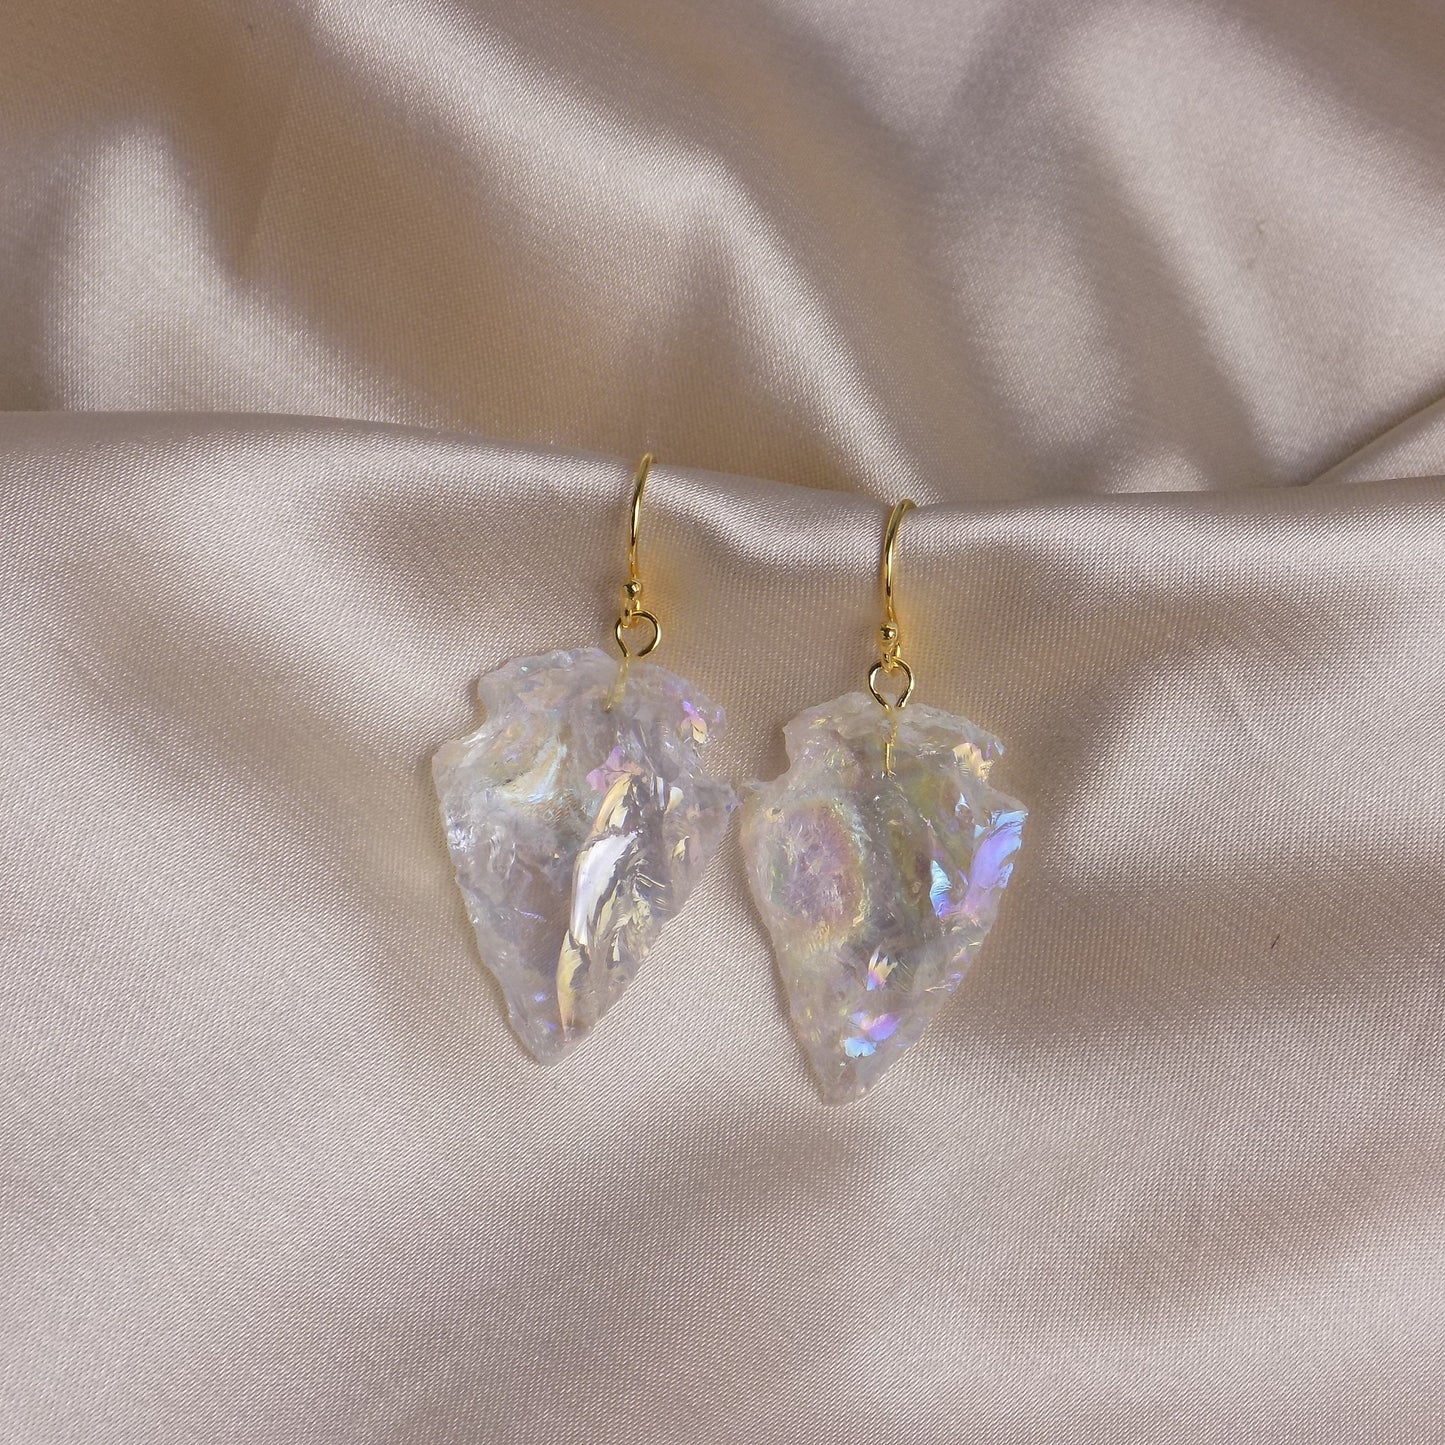 Angel Aura Quartz Arrowhead Earrings Gold, Unique Iridescent Crystal Jewelry Boho, Gift For Her, M7-134